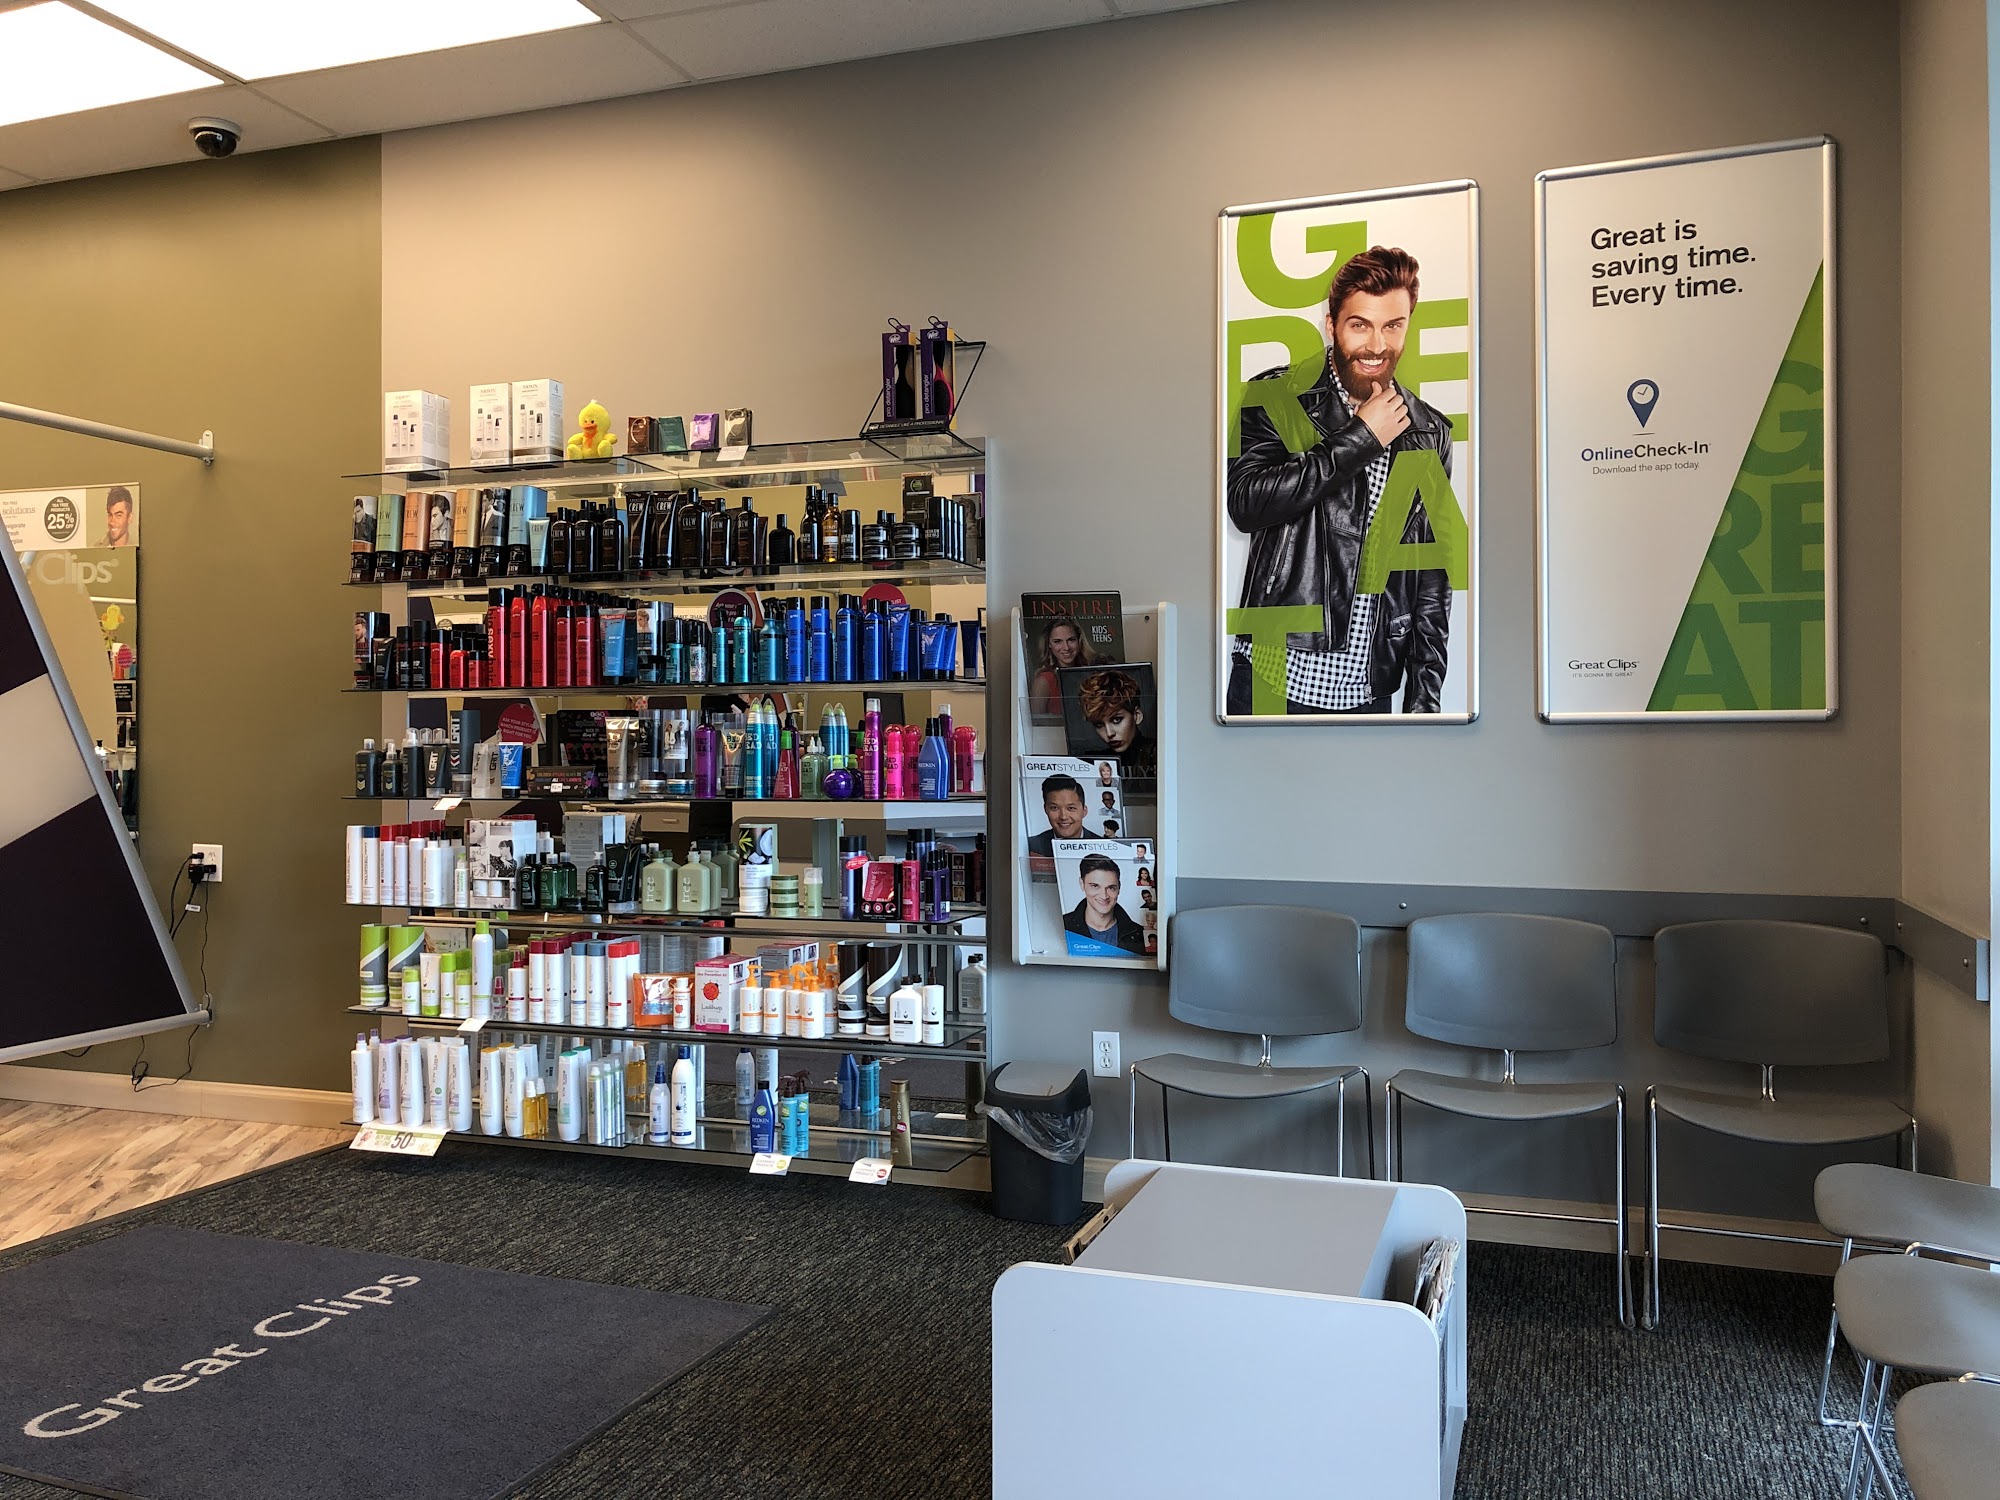 Great Clips 9701 Dixie Hwy, Clarkston Michigan 48348